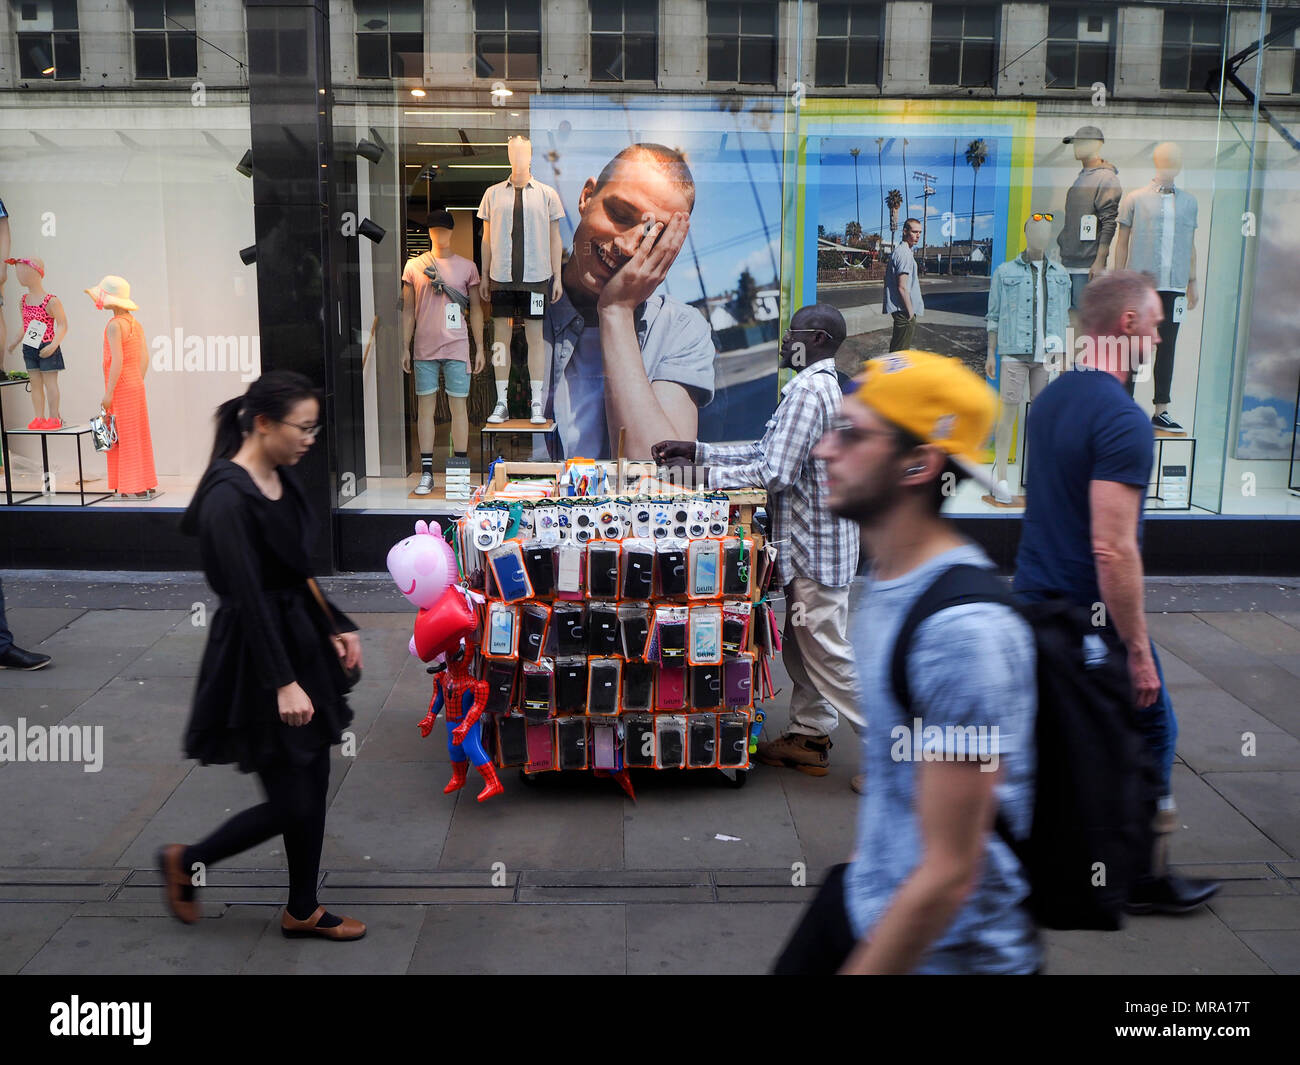 Street trader with portable stall Stock Photo